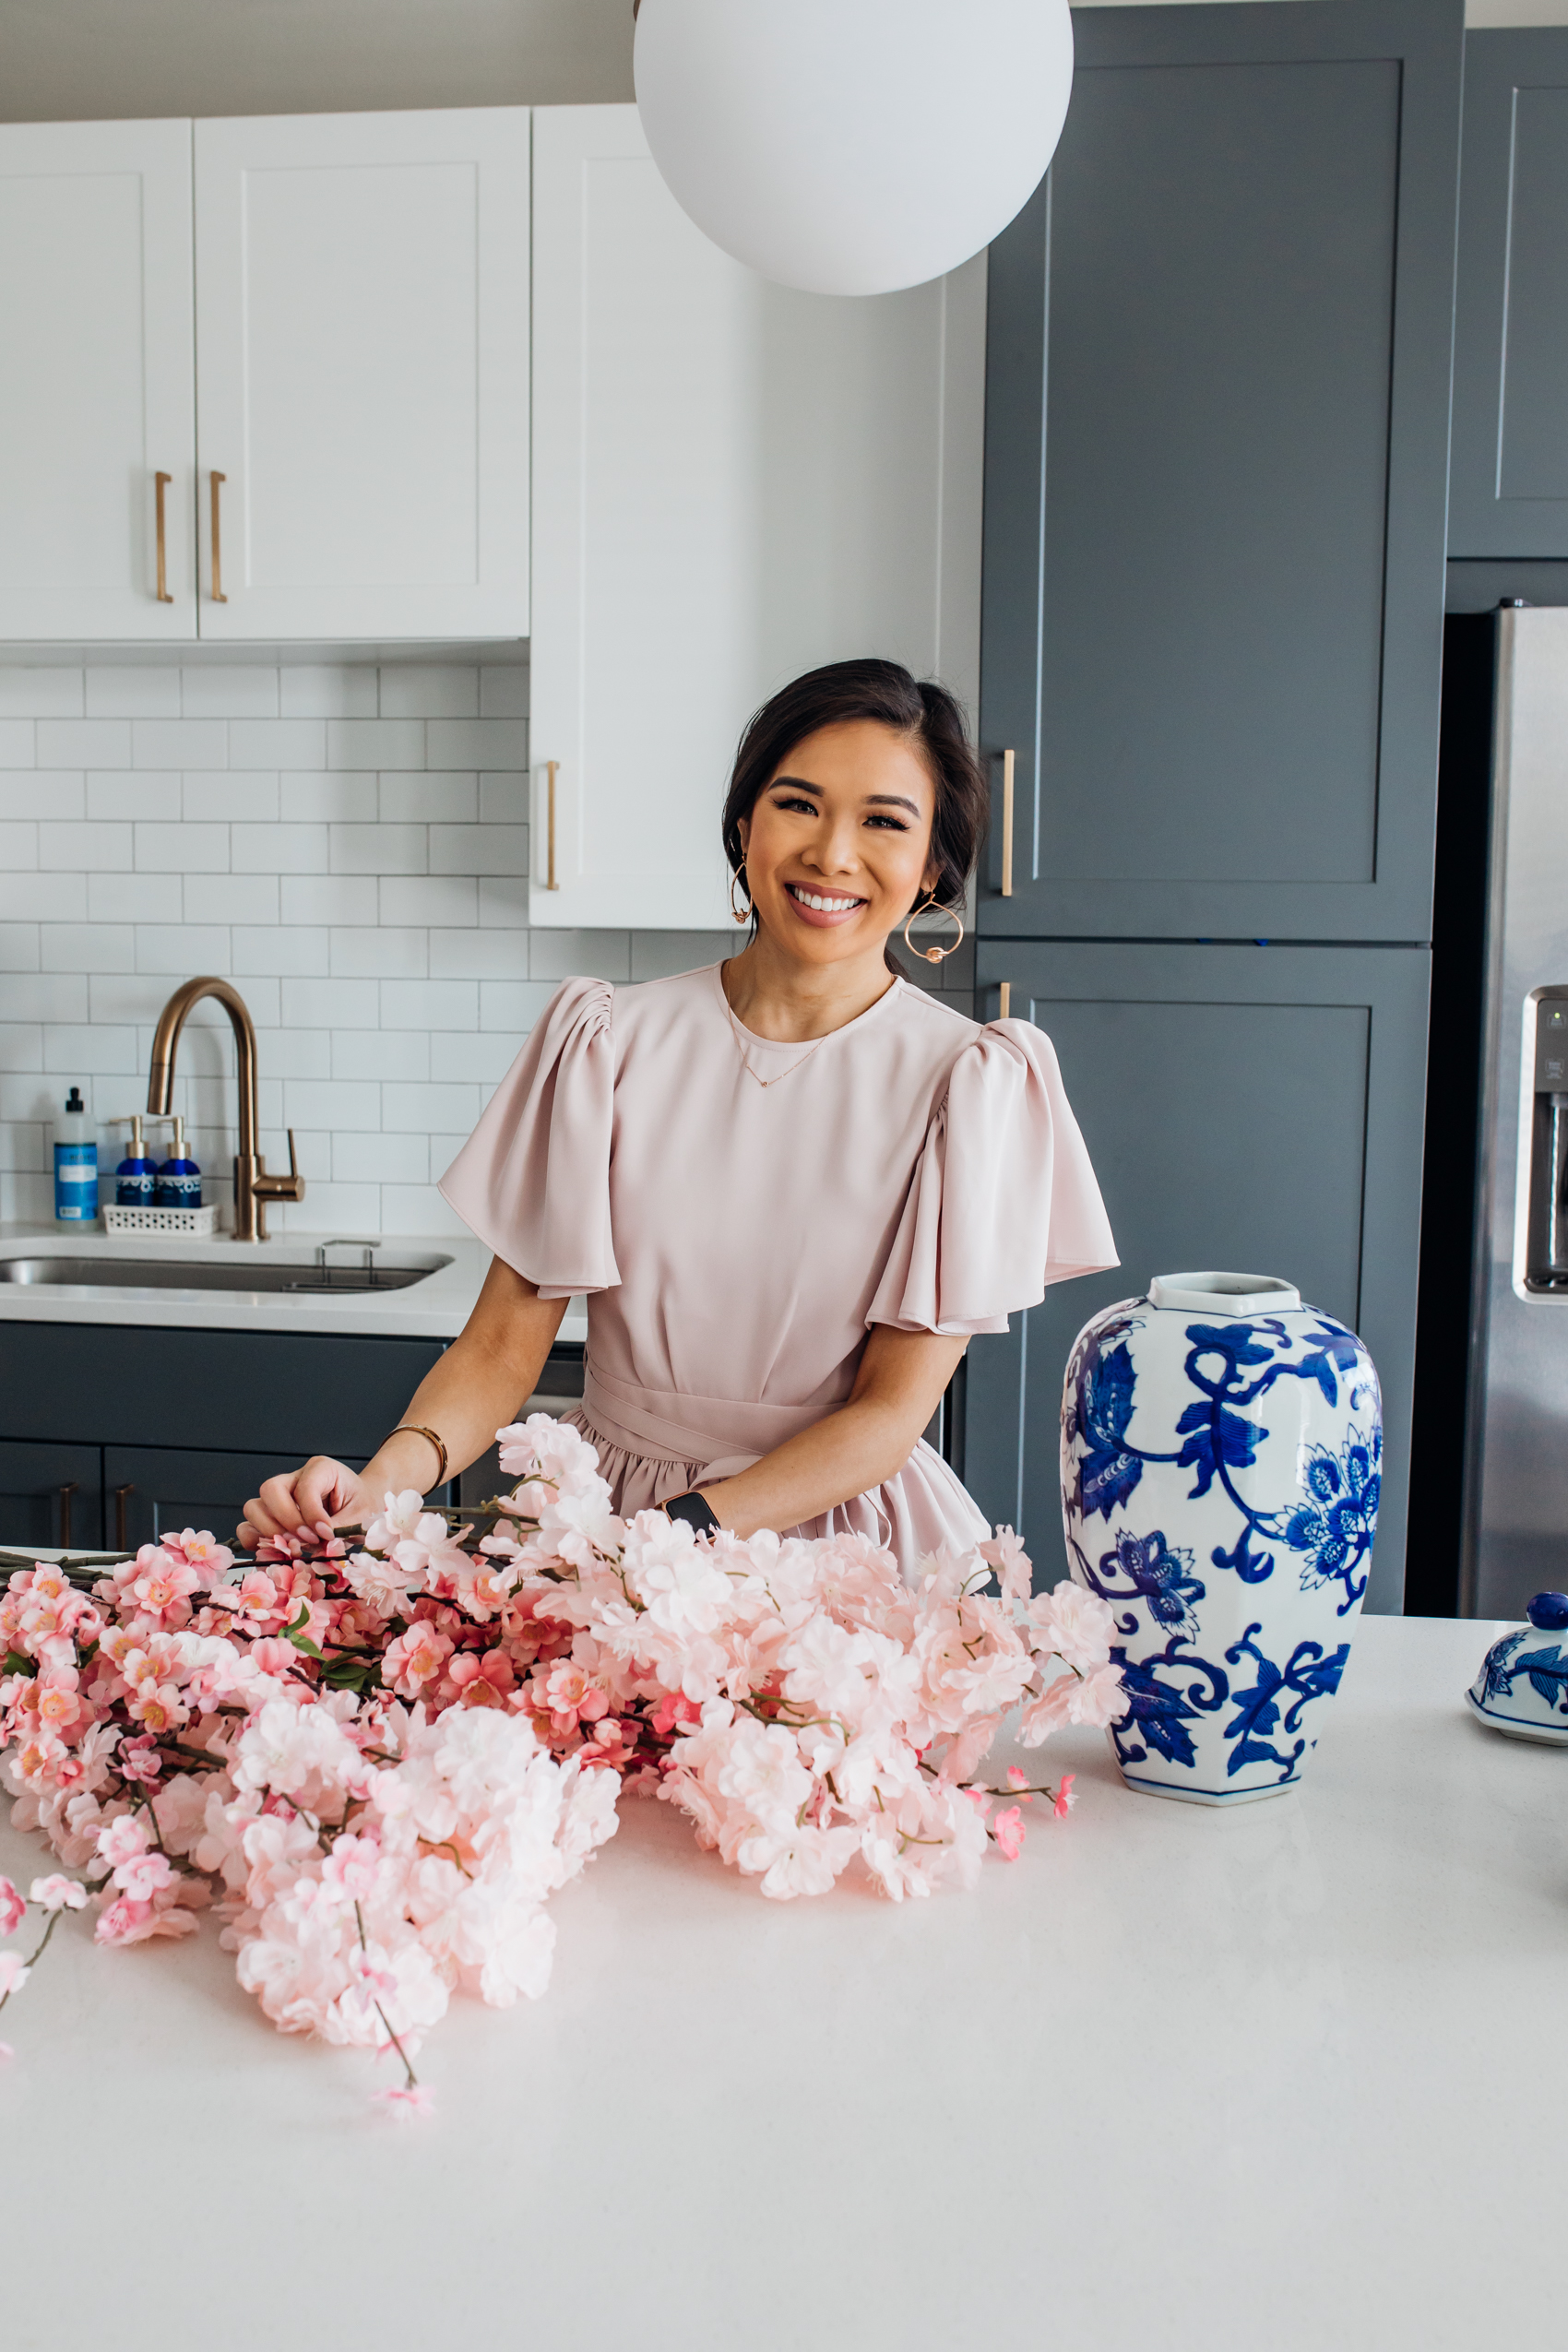 Blogger Hoang-Kim shares how she refreshes her two-toned kitchen with spring home decor using a ginger jar, cherry blossoms and candles